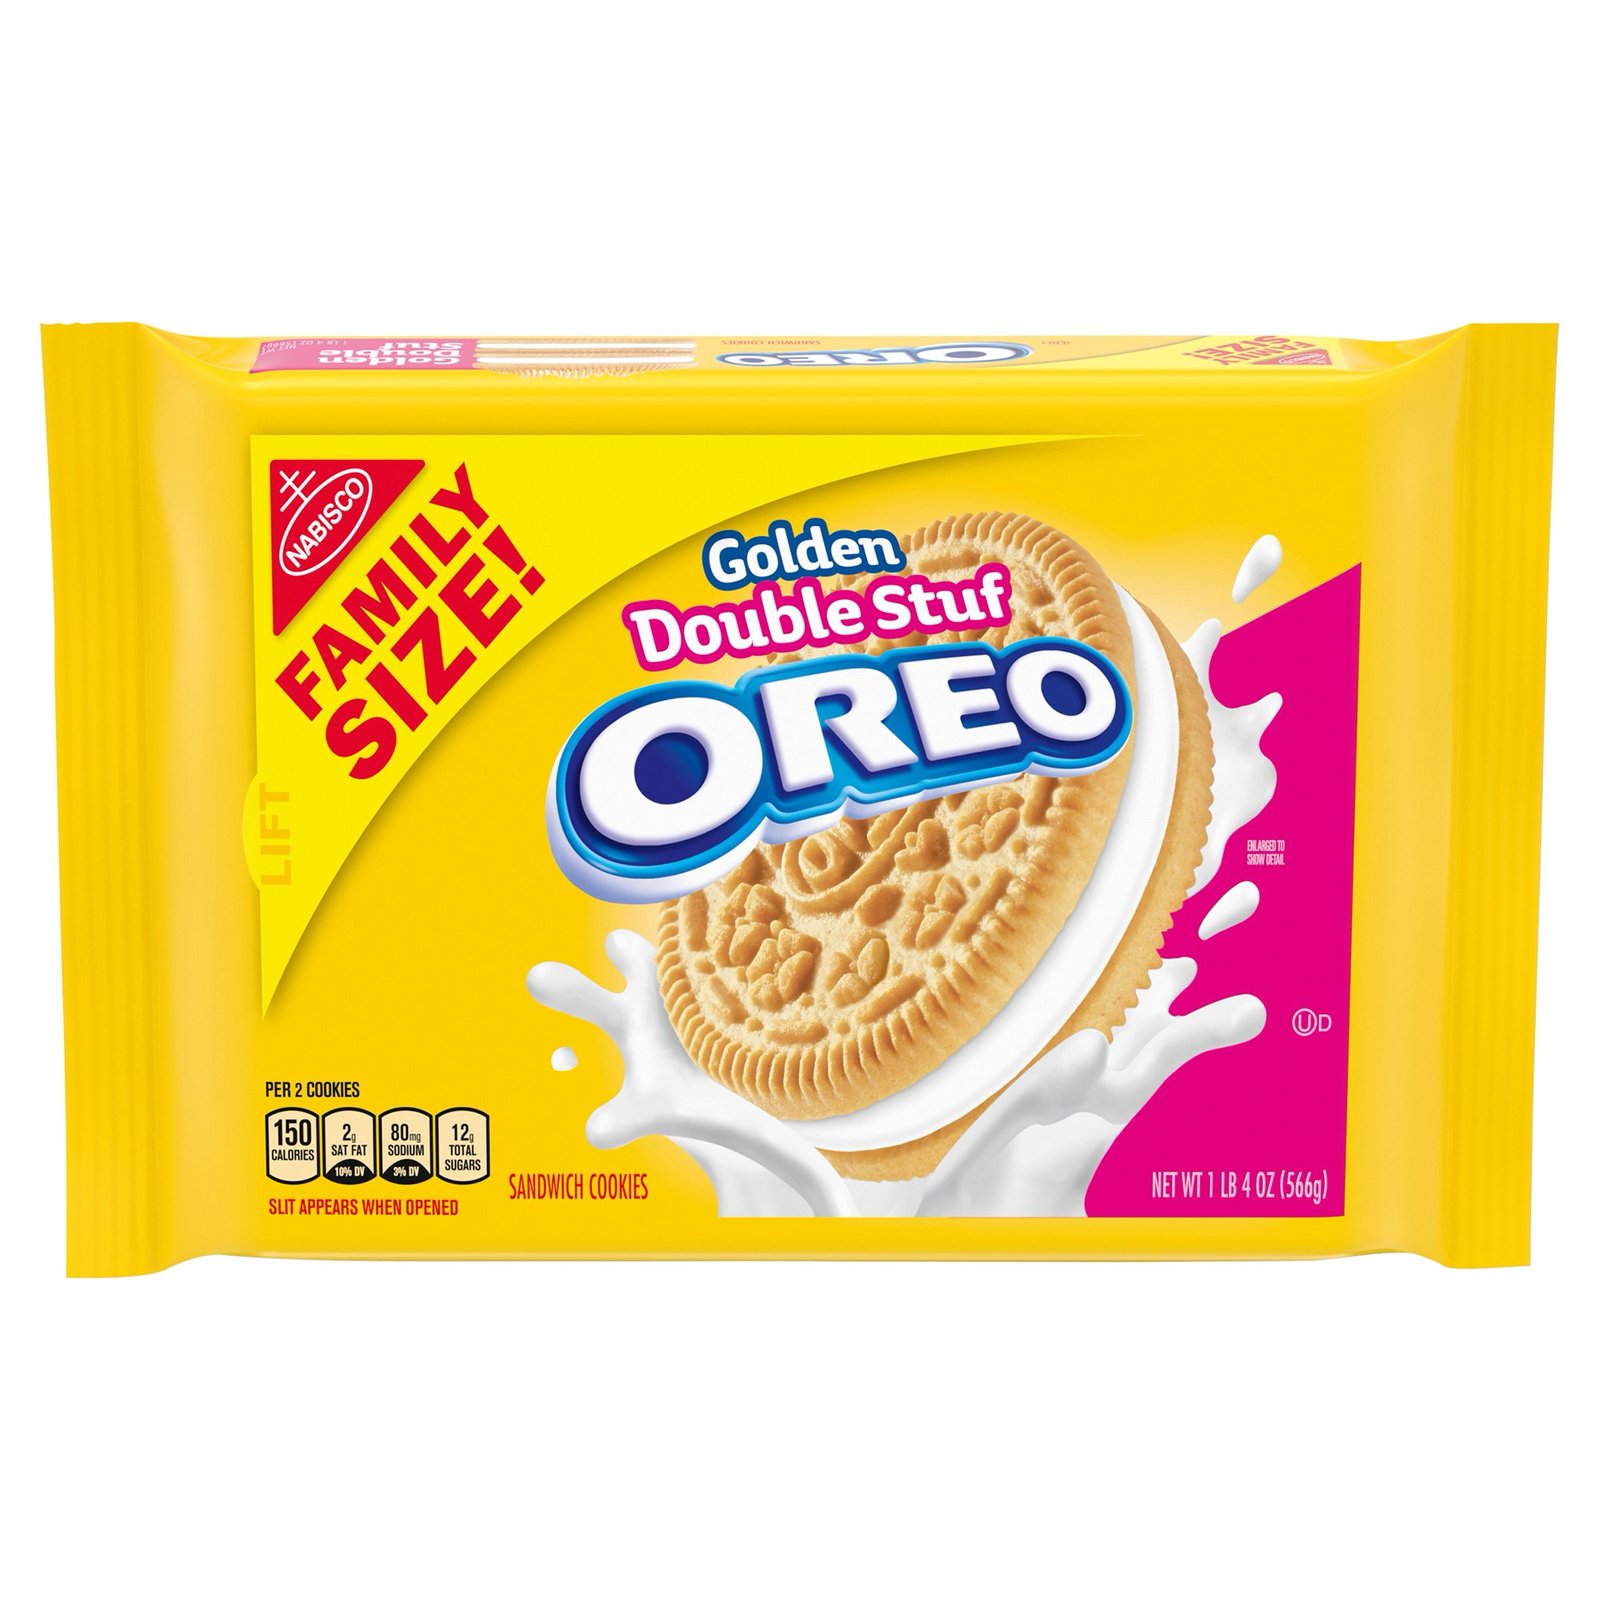 NABISCO OREO Real Double Stuf Golden Sandwich Cookies Family Size Pack - 20 oz.